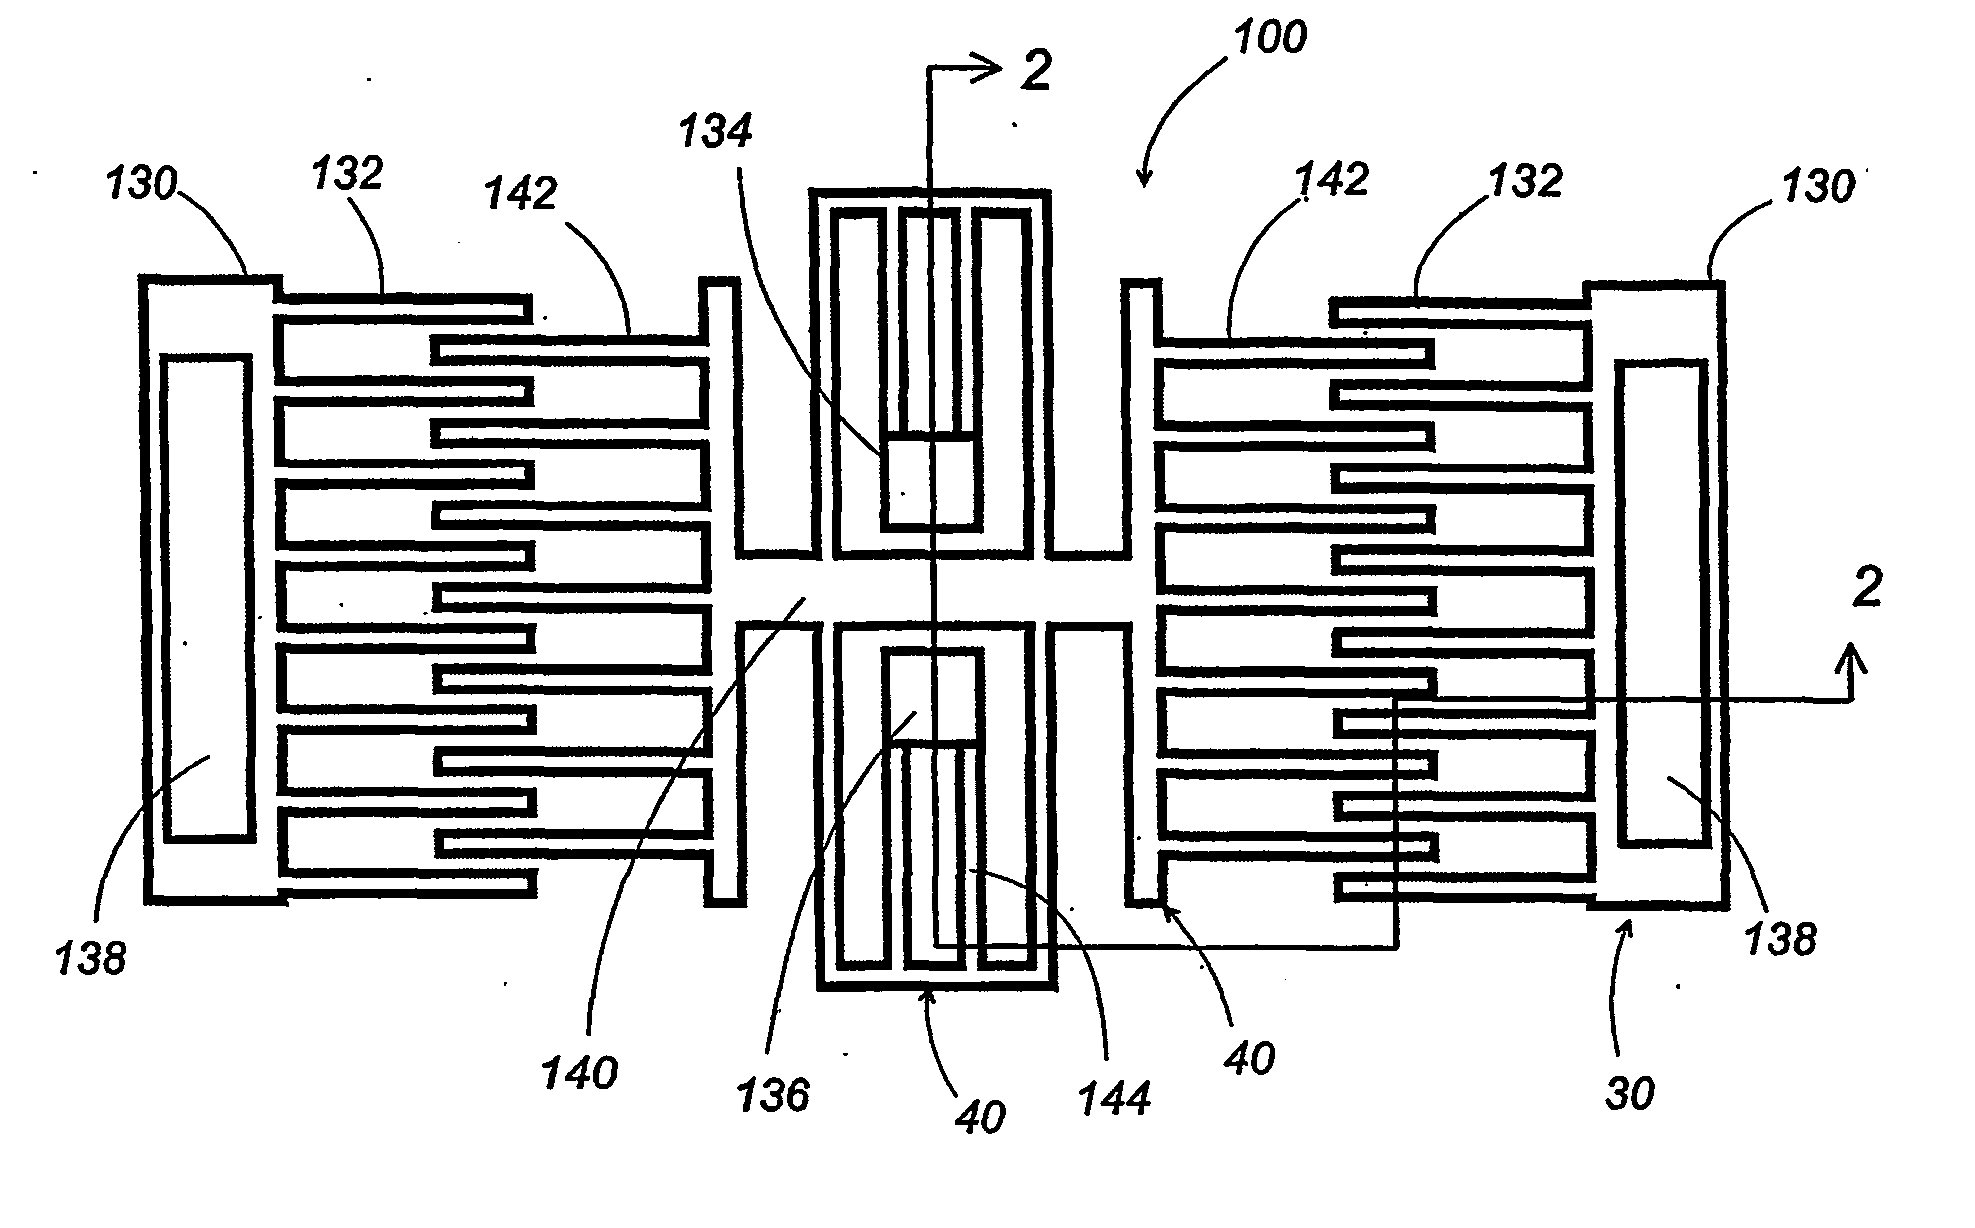 Process for fabricating a micro-electro-mechanical system with movable components